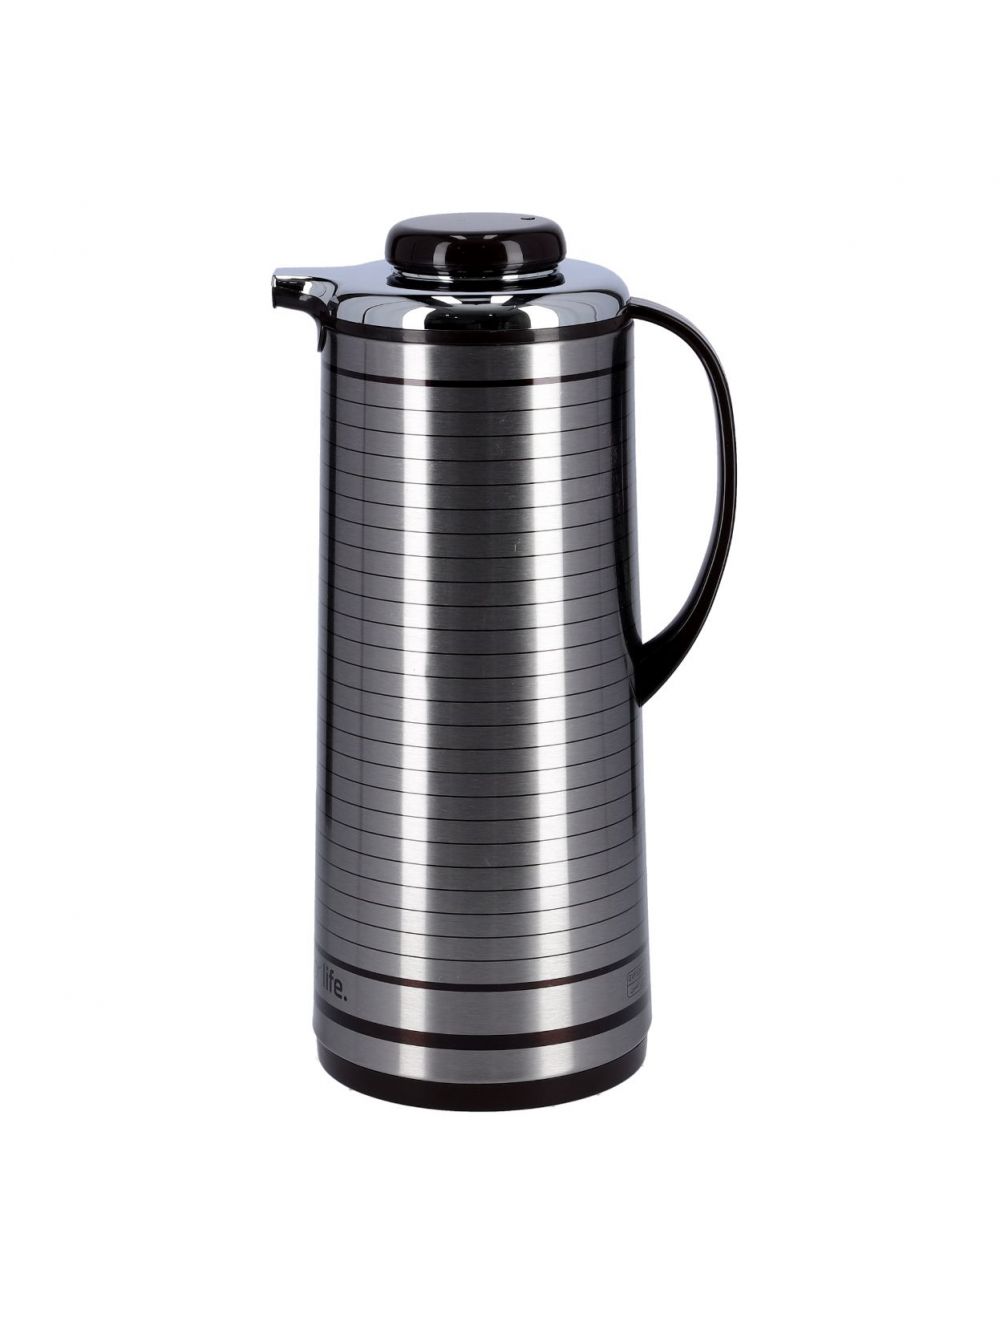 Geepas GVF5261 1.9 L Hot and Cold Vacuum Flask, Silver